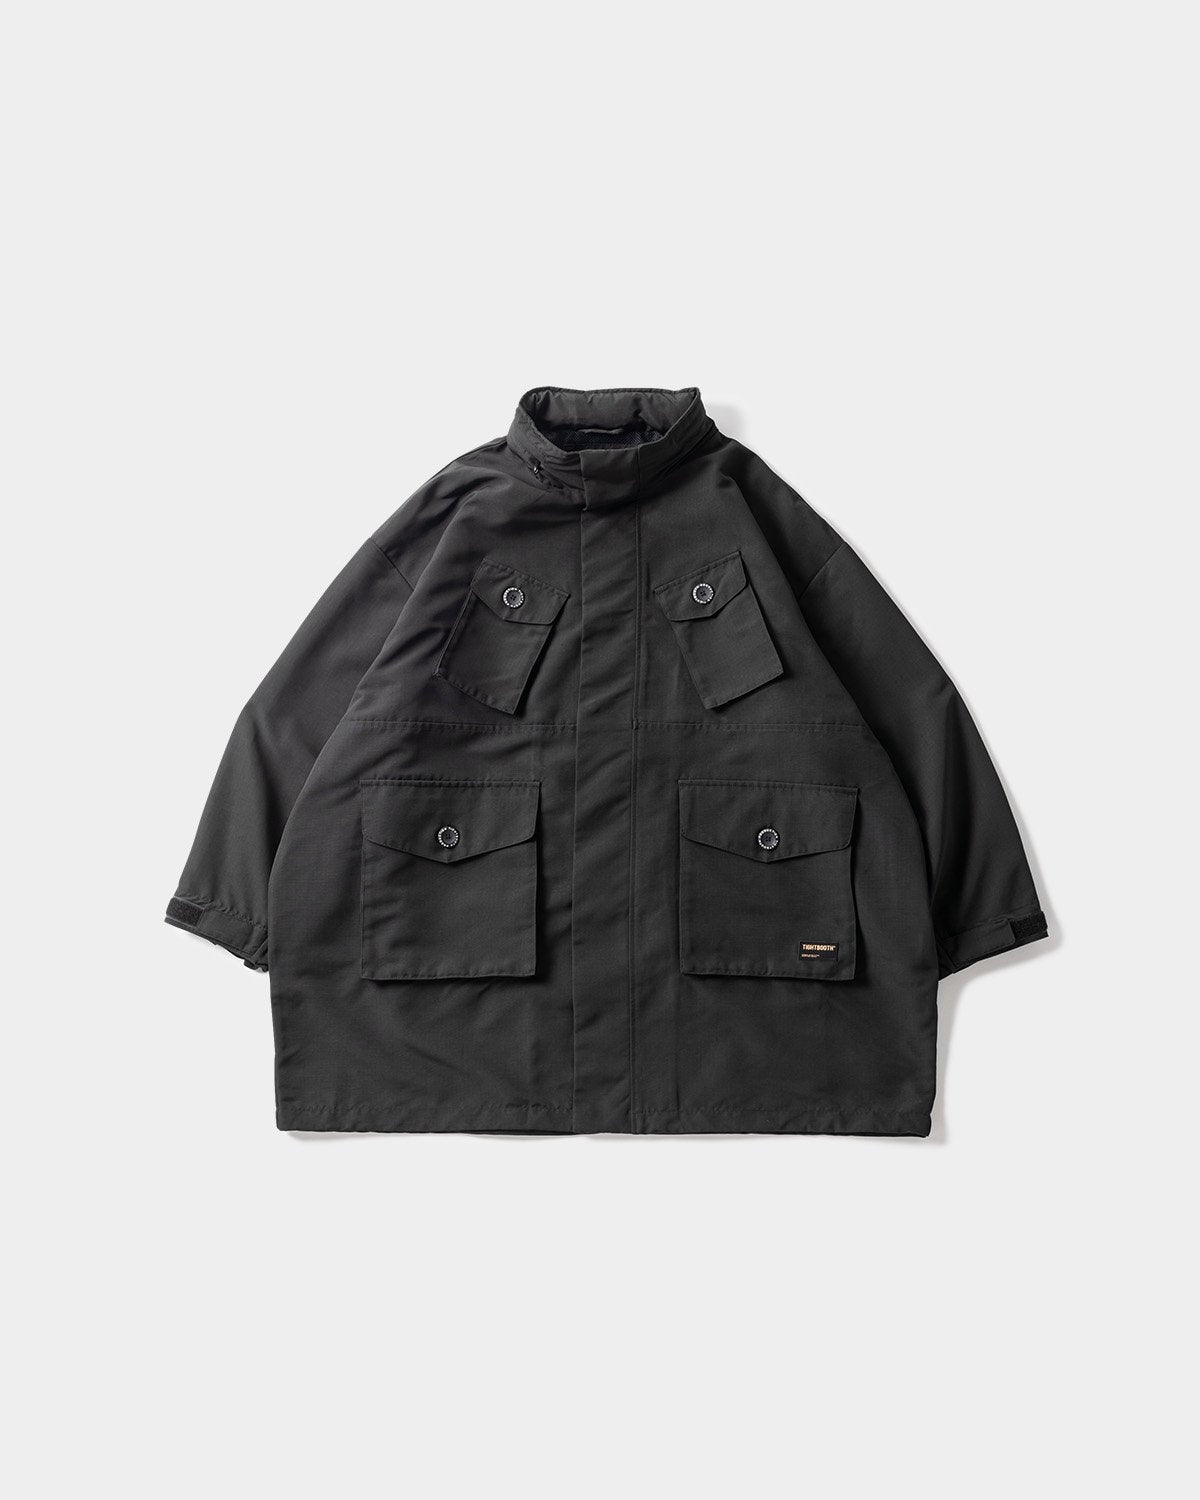 TIGHTBOOTH T-65 FEILD JKT – unexpected store